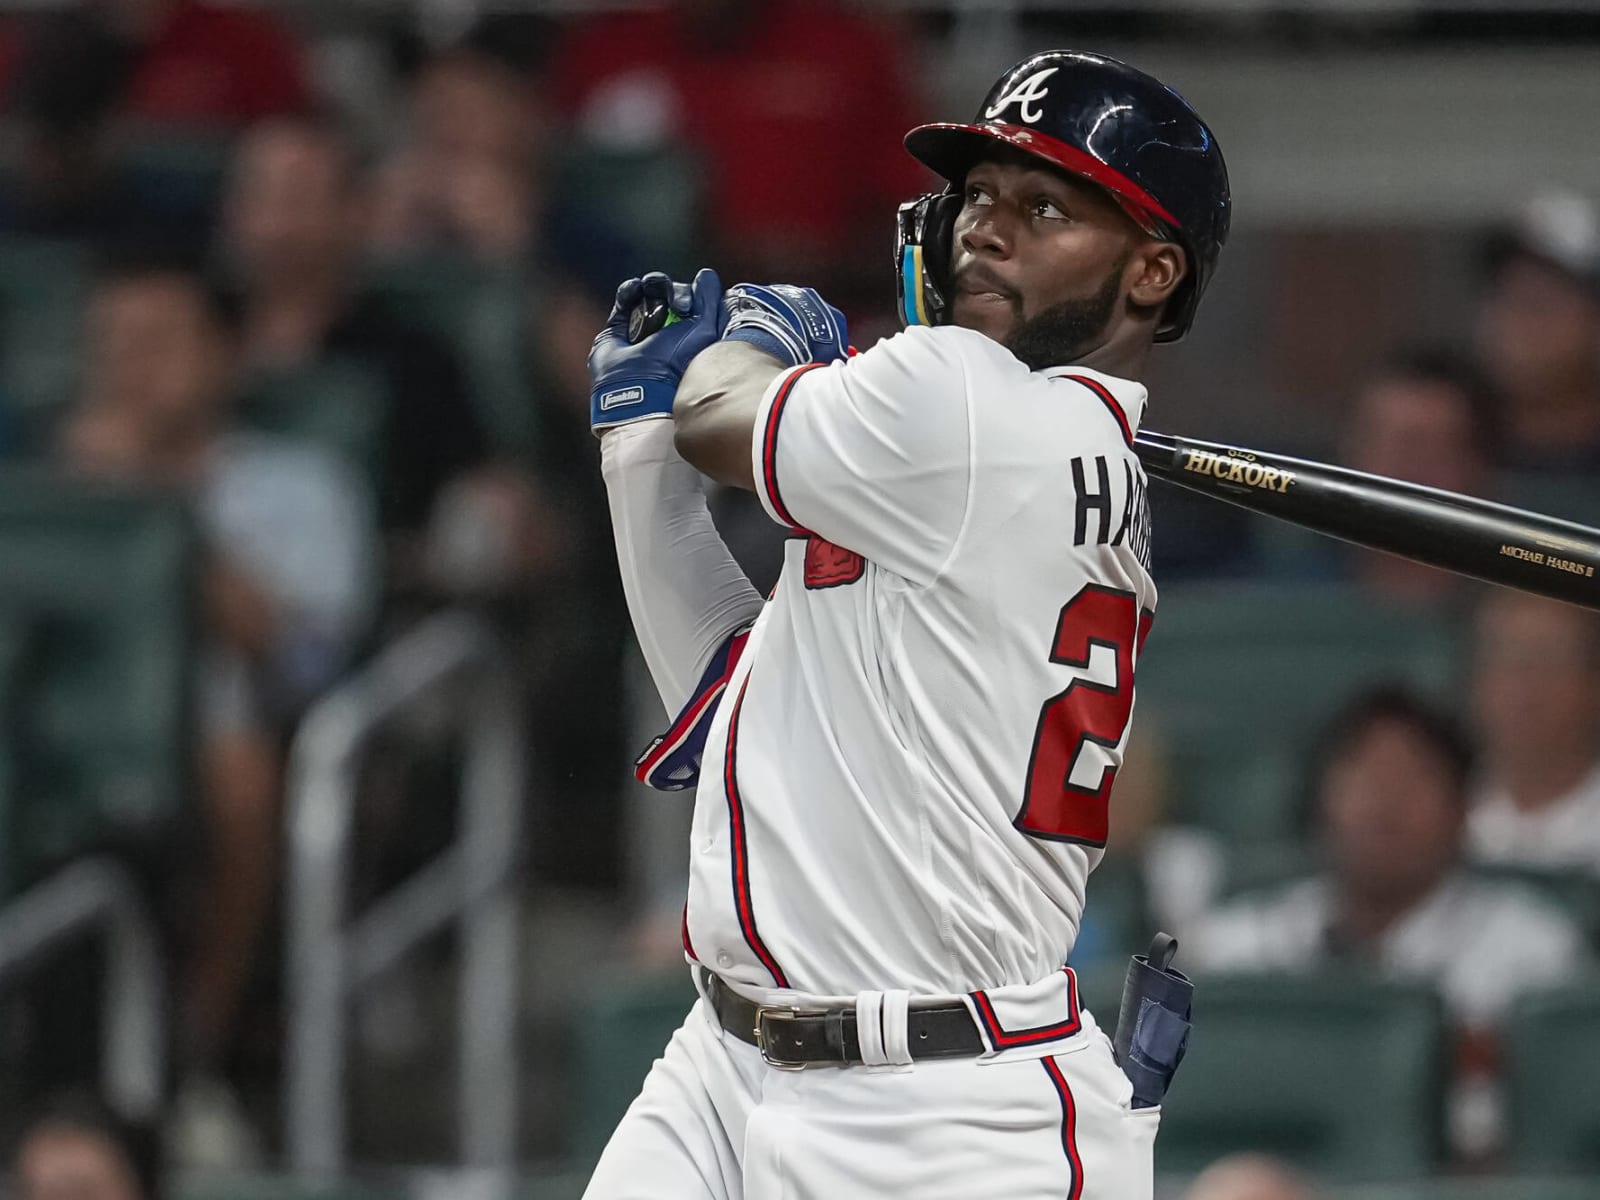 Youngest In Majors, Michael Harris II Aims To Help Atlanta Braves